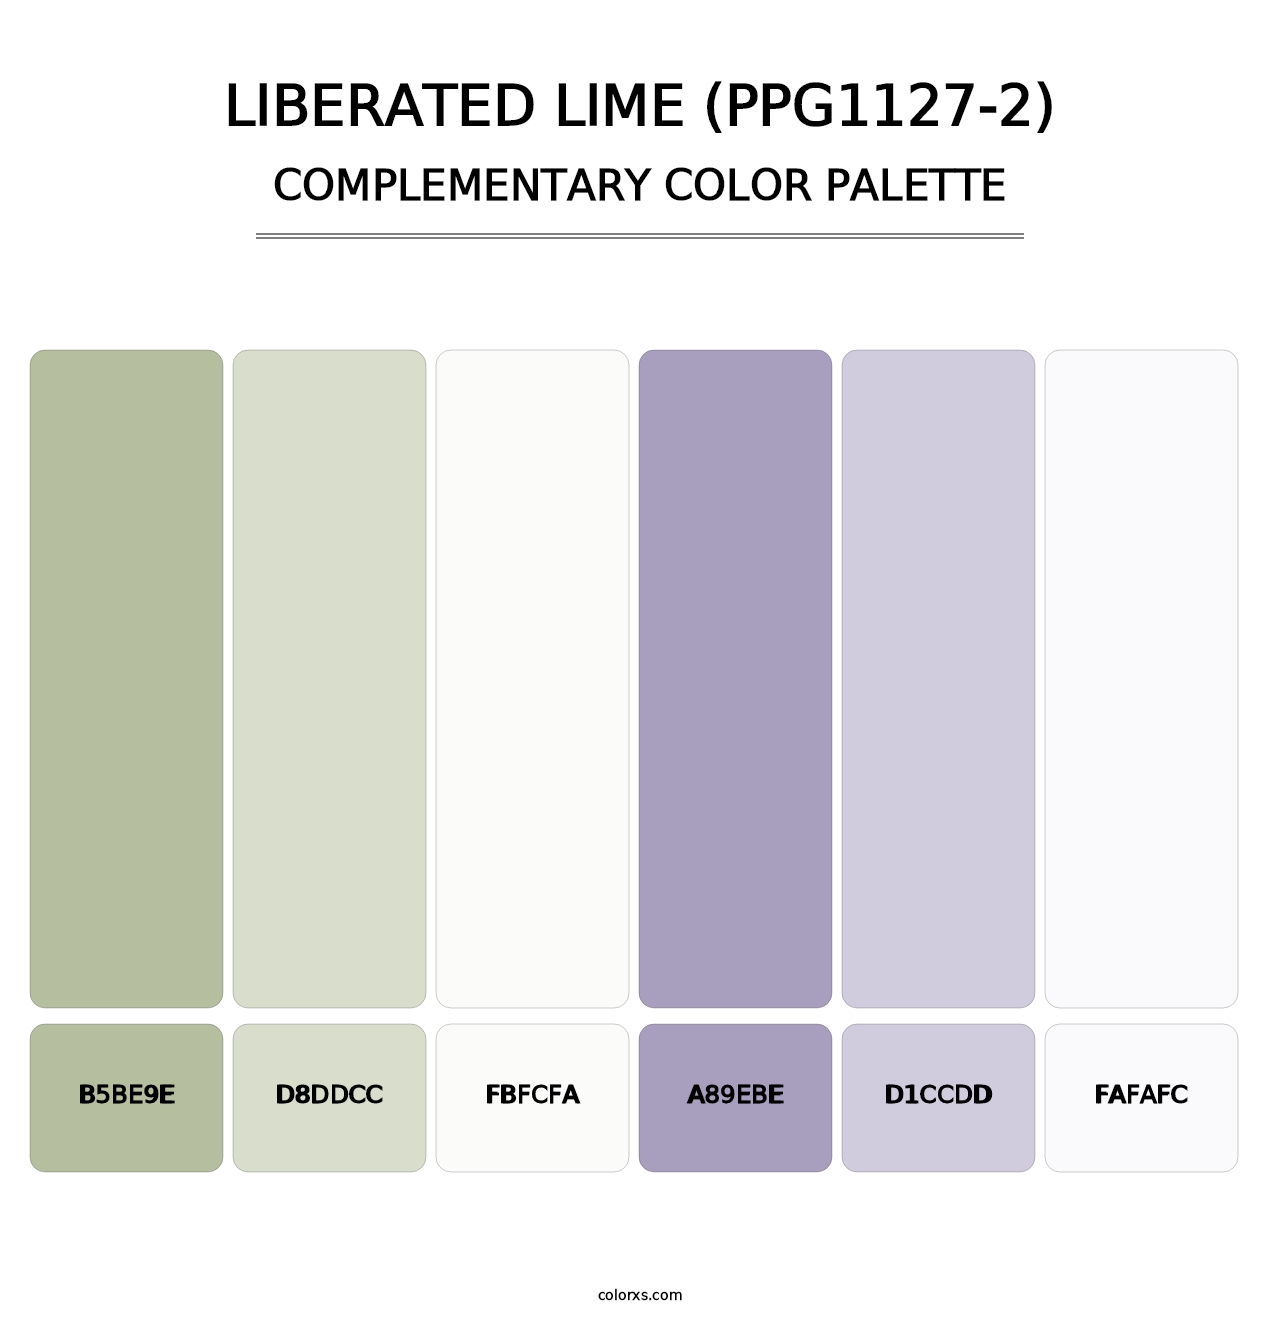 Liberated Lime (PPG1127-2) - Complementary Color Palette